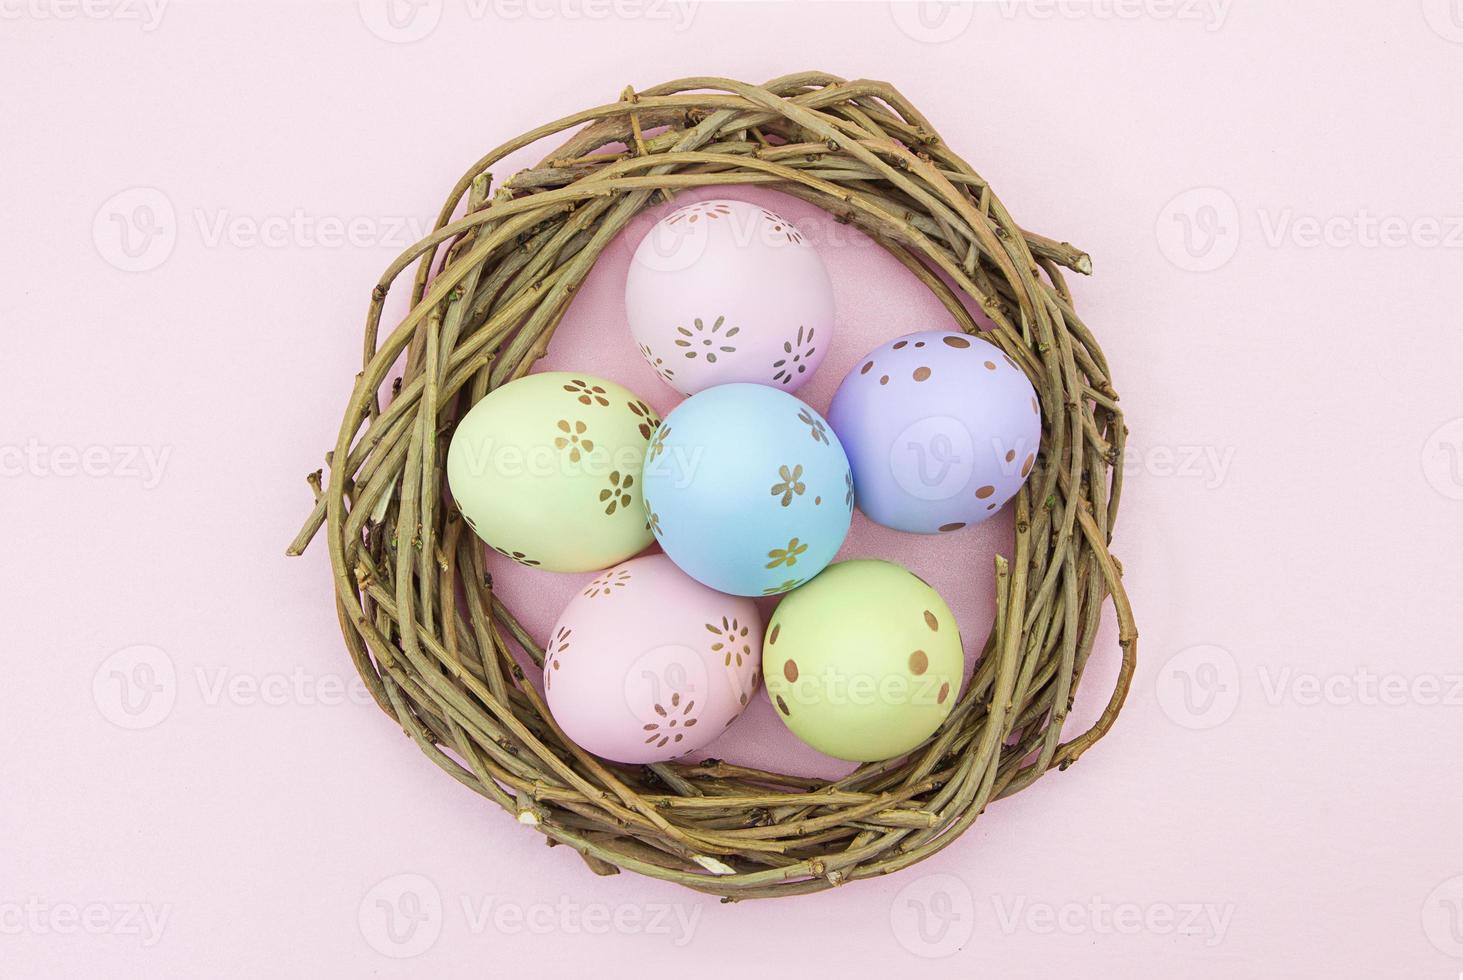 Painted multicolored eggs in wooden nest of branches on pink background. View from above. Easter, birth. Copy space photo